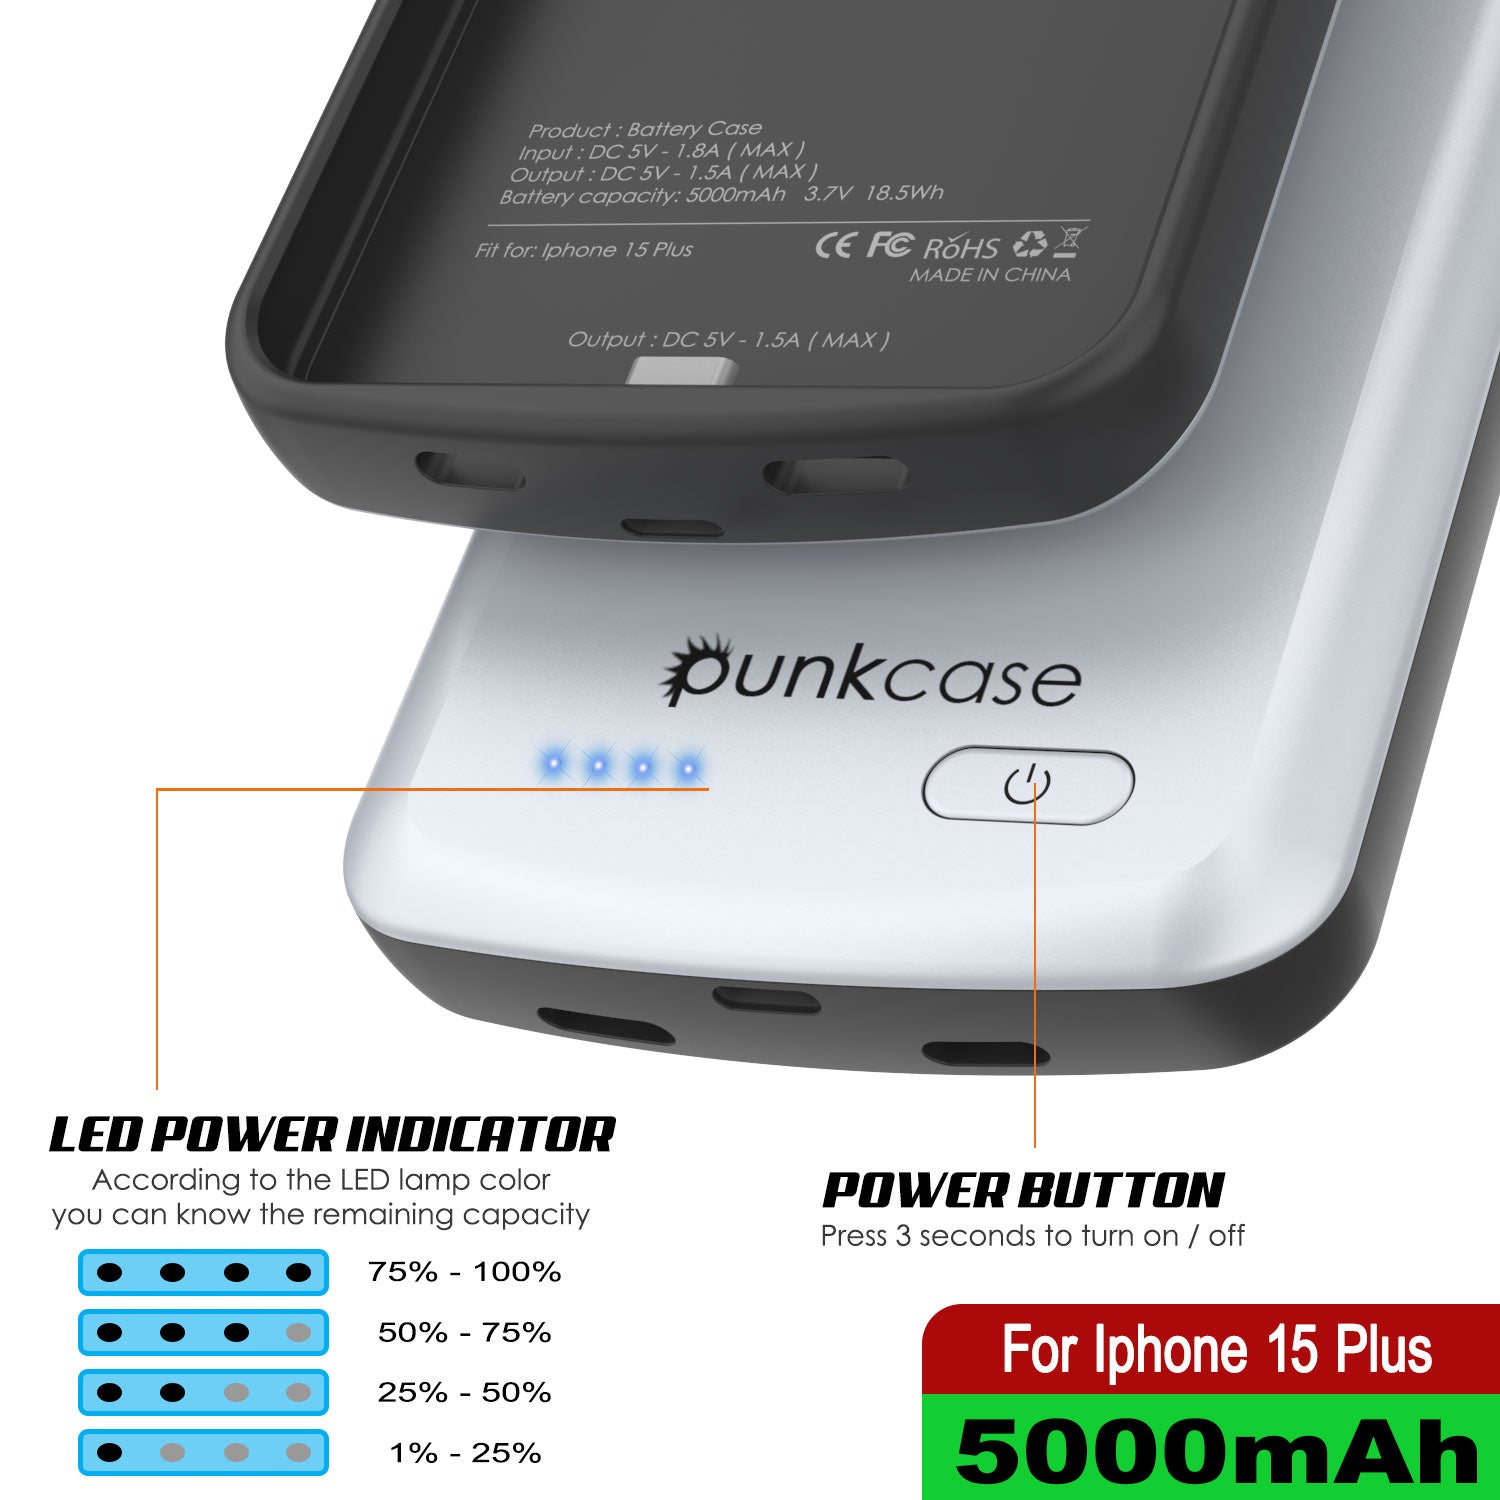 iPhone 15 Plus Battery Case, PunkJuice 5000mAH Fast Charging Power Bank W/ Screen Protector | [White]